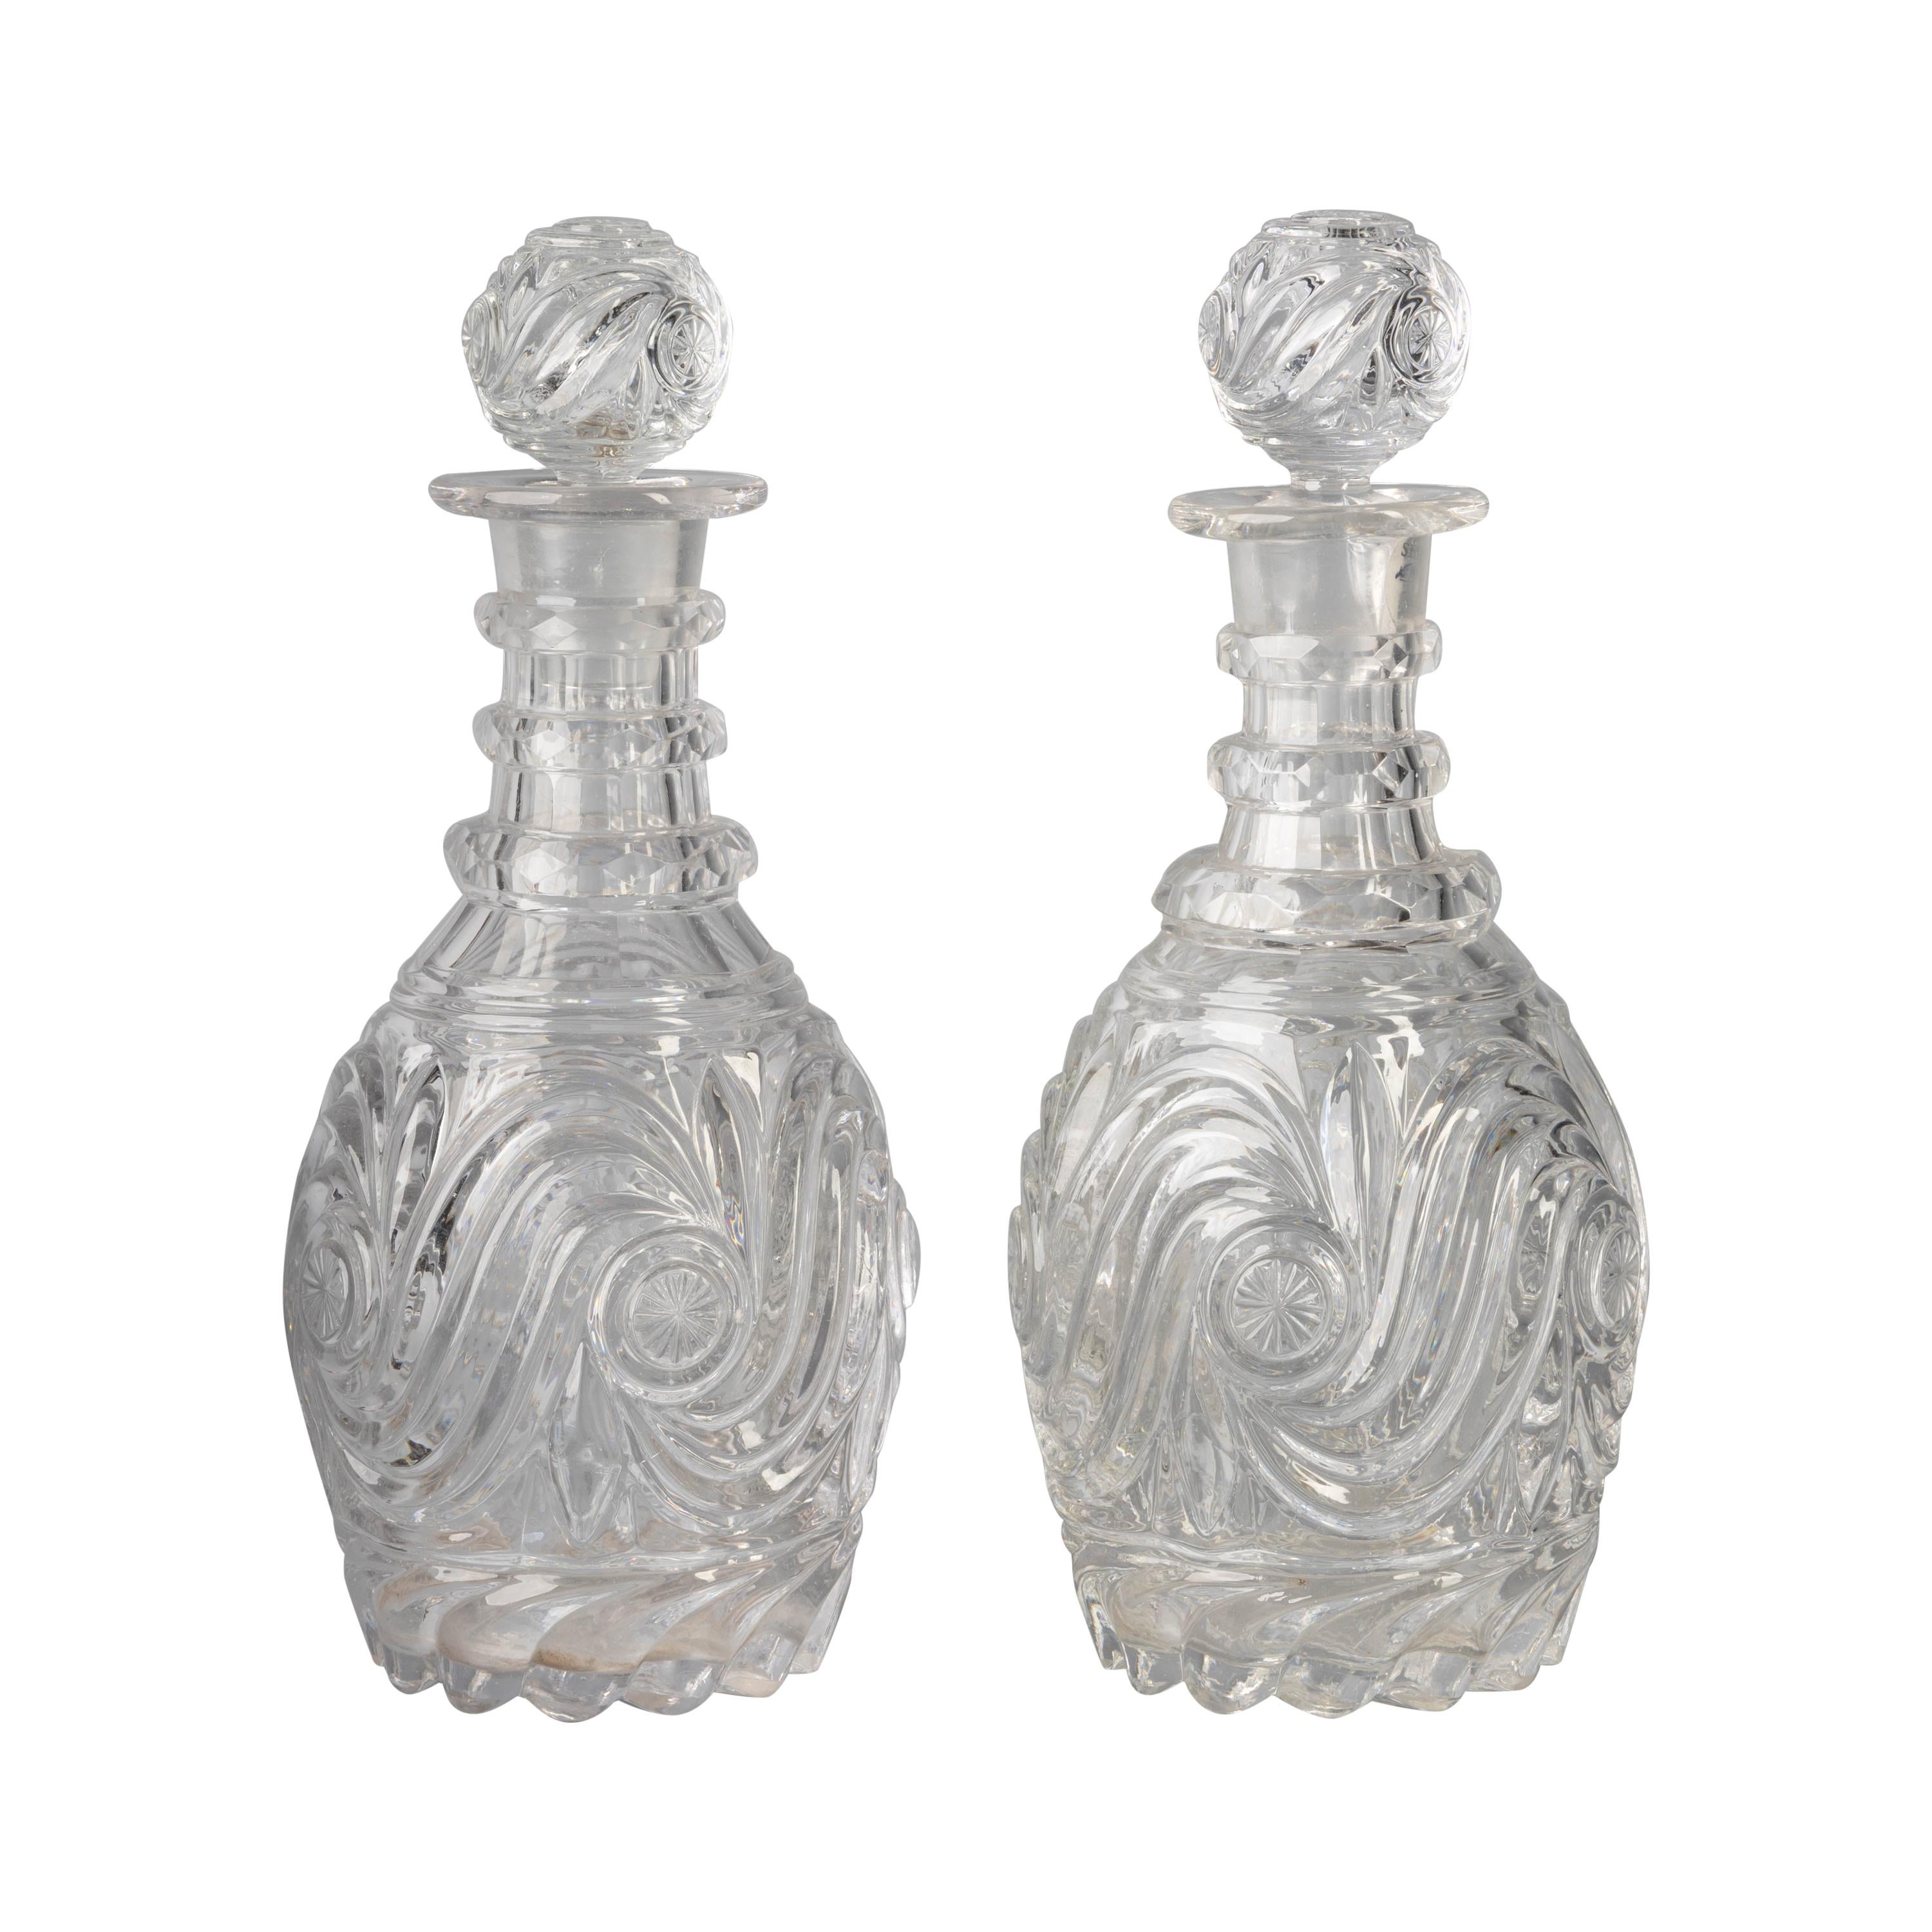 Pair of English Fancy-Cut Glass Decanters, circa 1840 For Sale